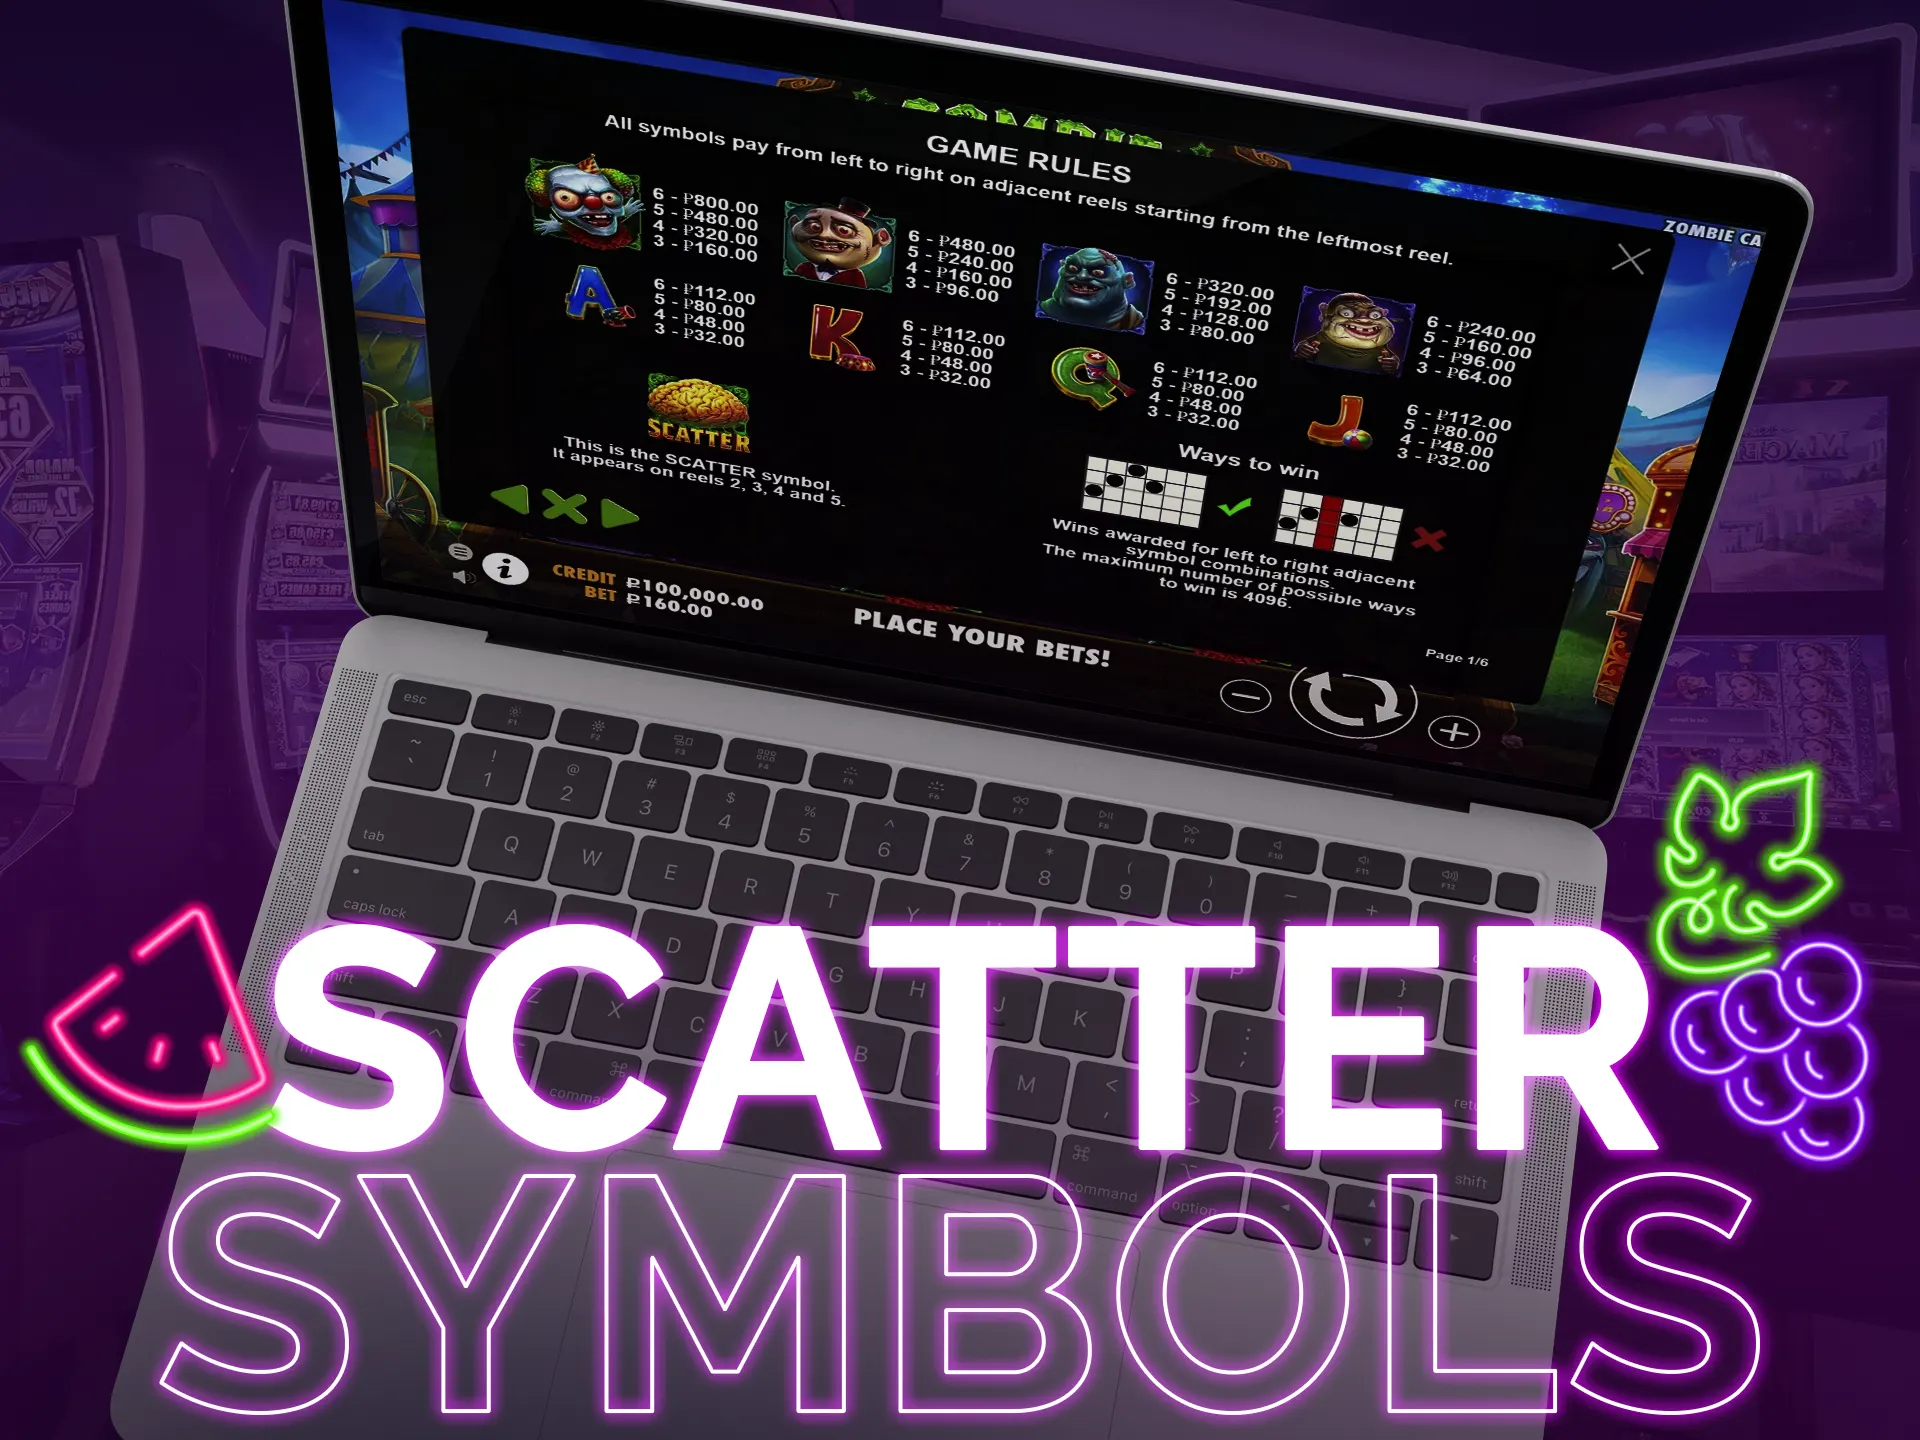 Scatter symbols trigger bonuses, like free spins, with three appearances.